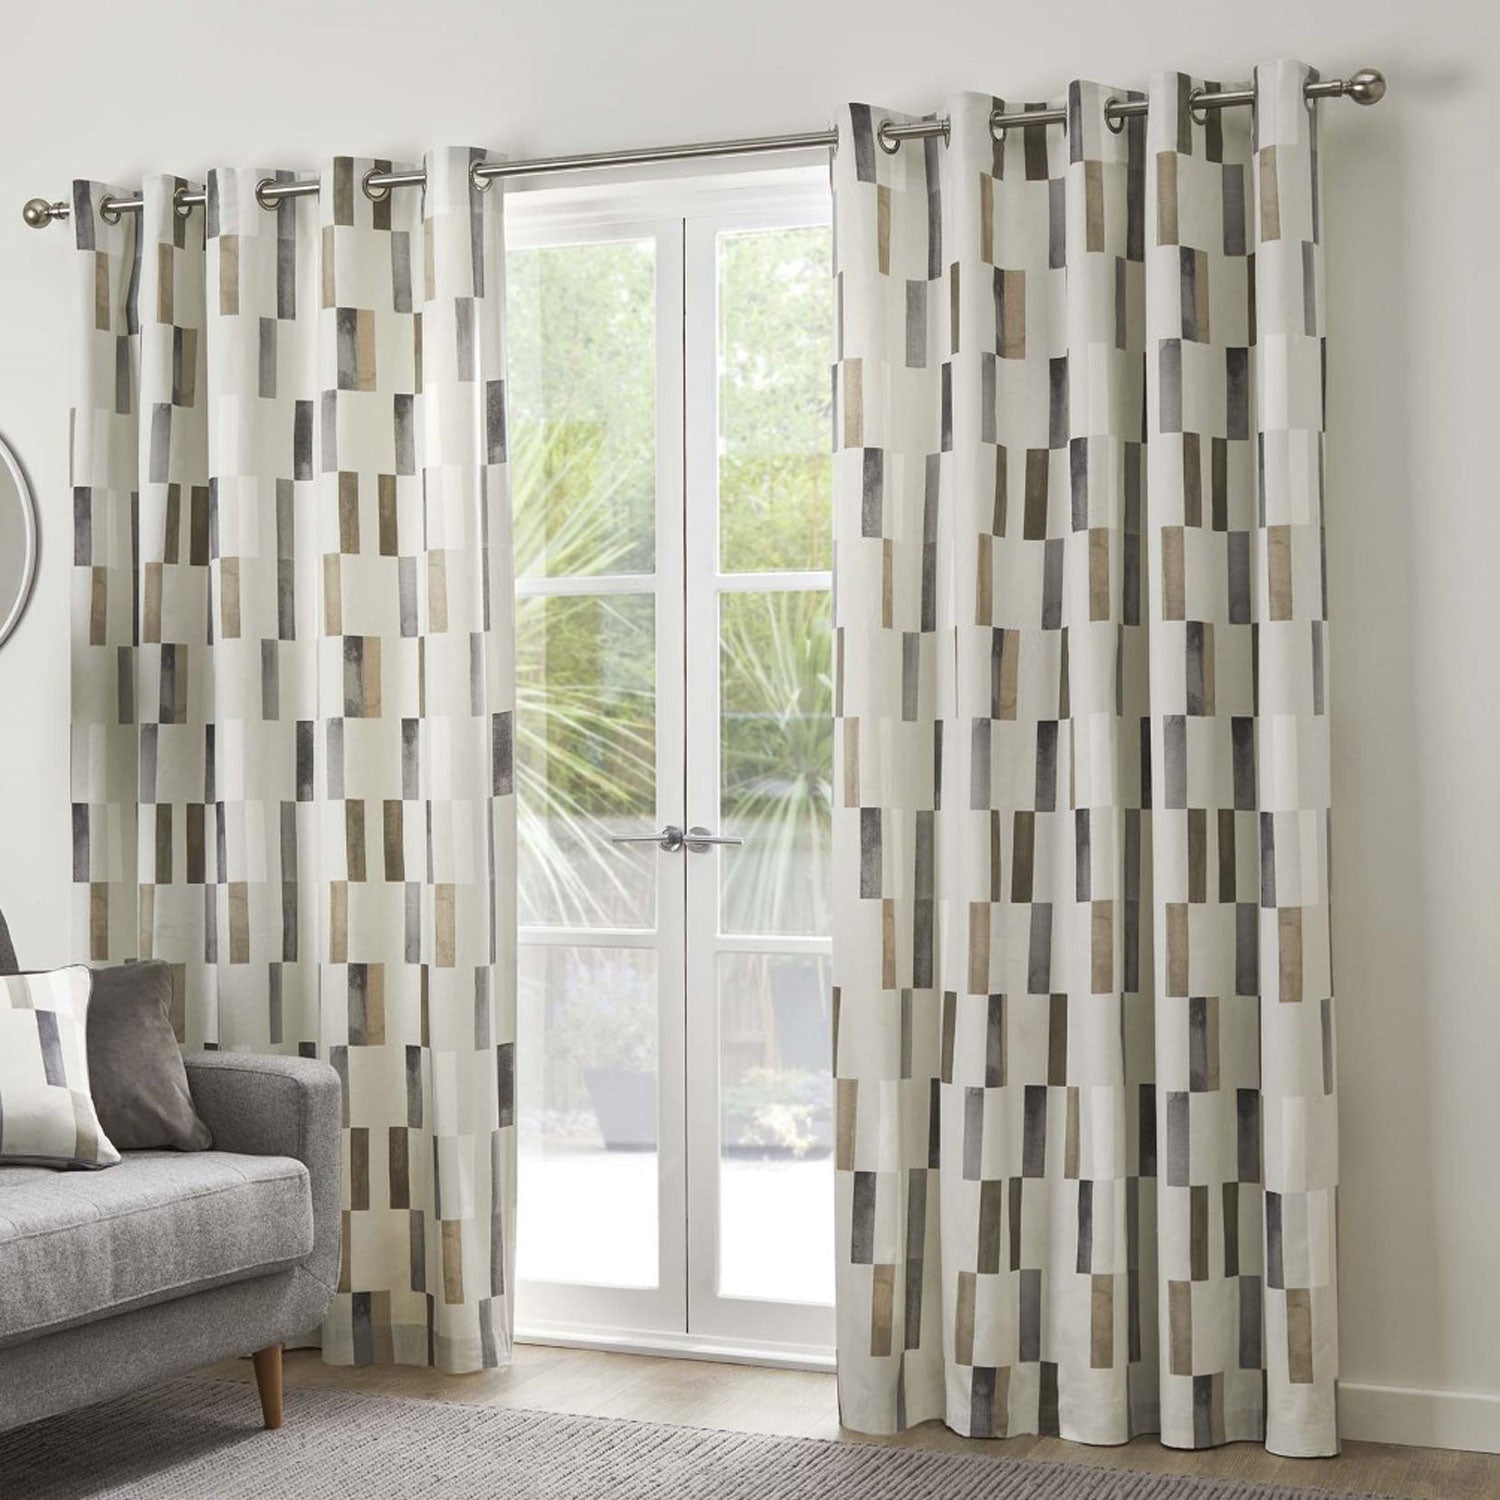 The Home Oakland Eyelet Curtains - Natural 1 Shaws Department Stores